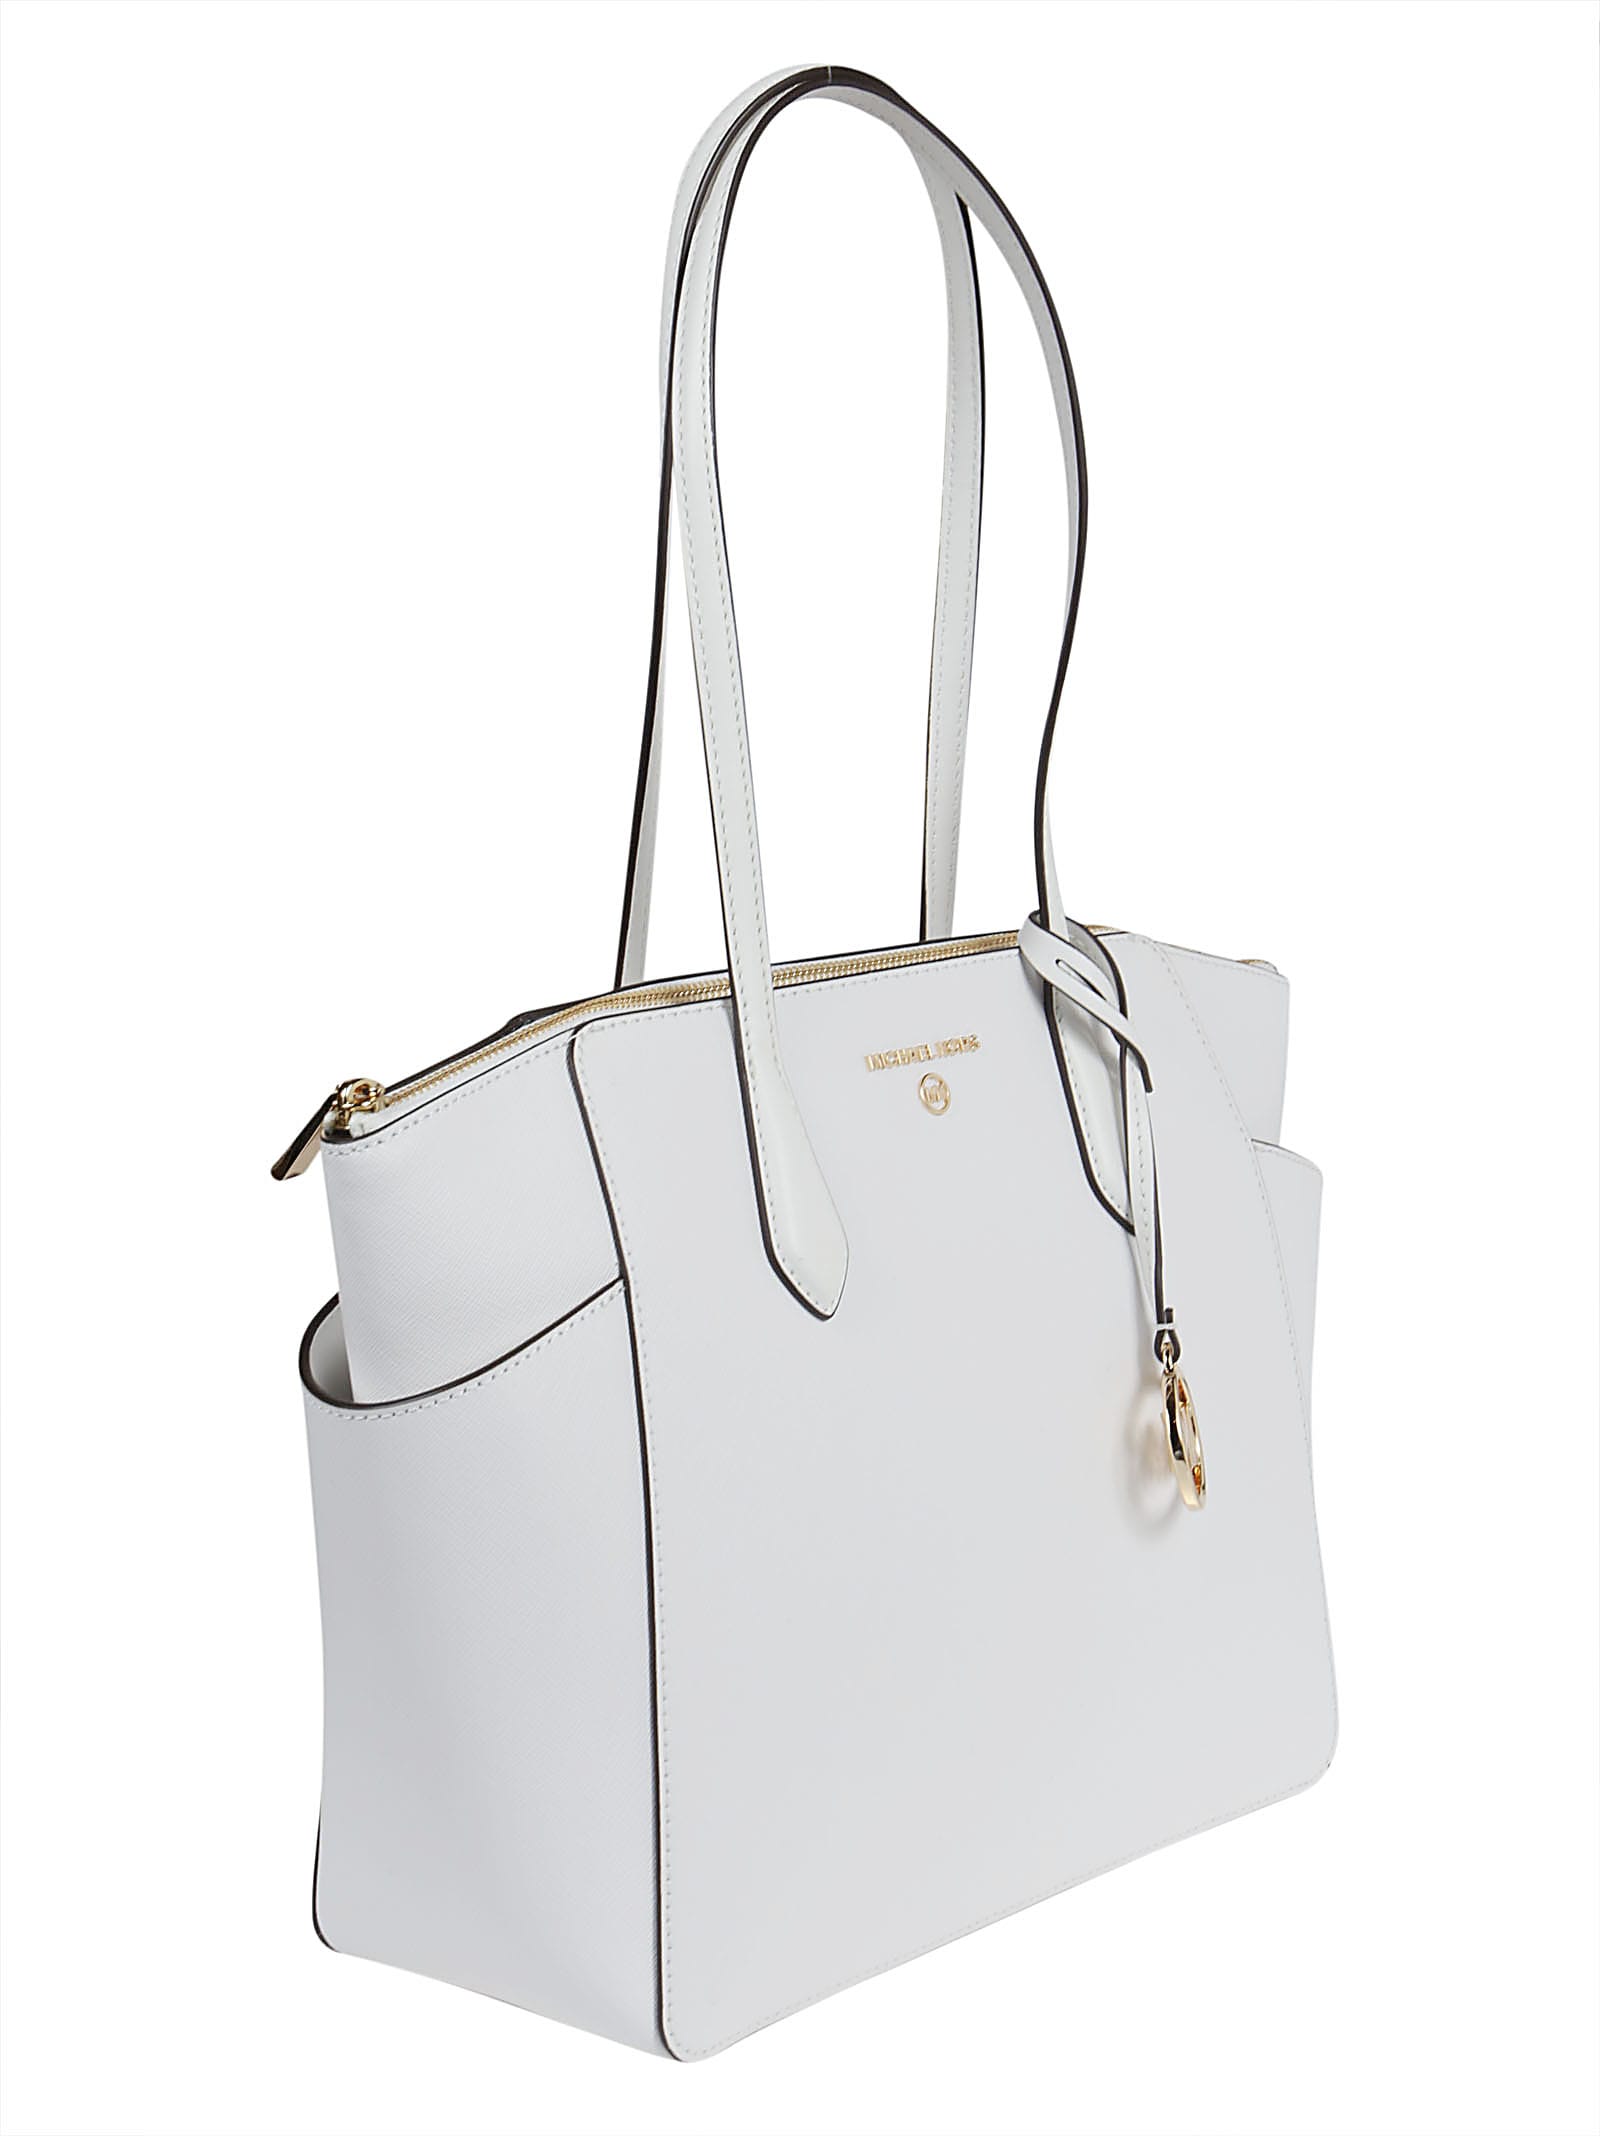 Michael Kors Marylin - Saffiano Leather Tote Bag In Optic White